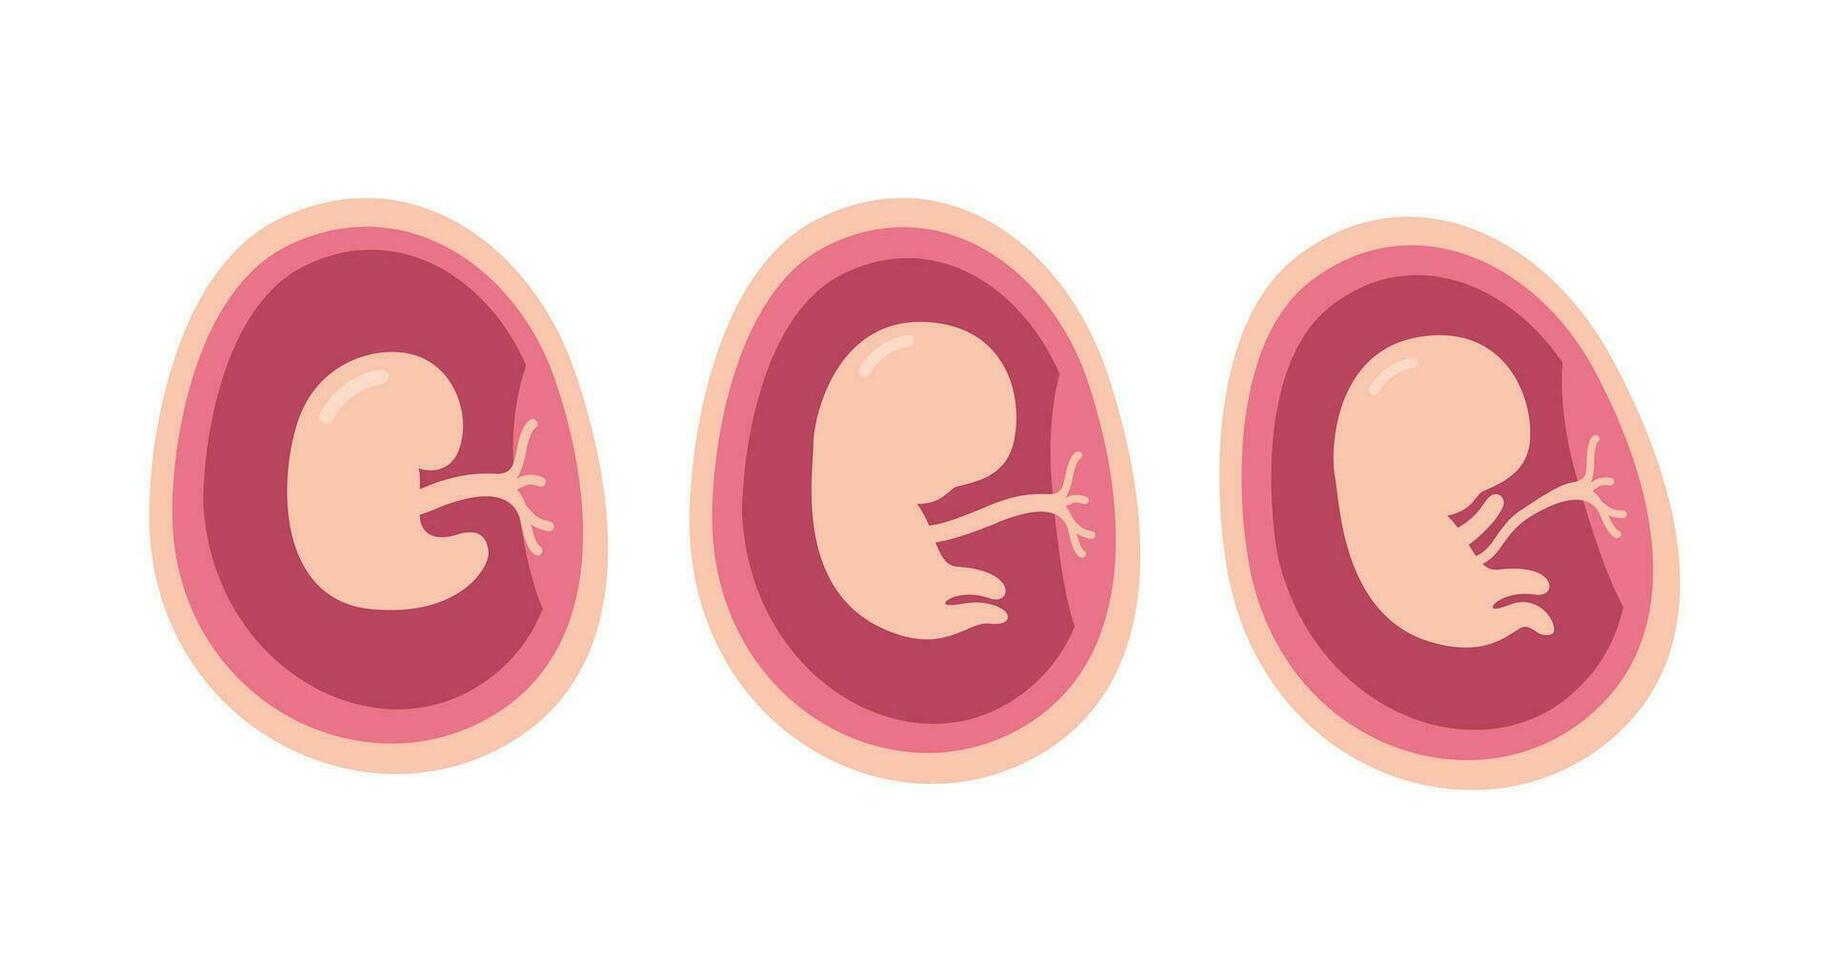 three stages of the human fetus, embryo development flat design illustration vector